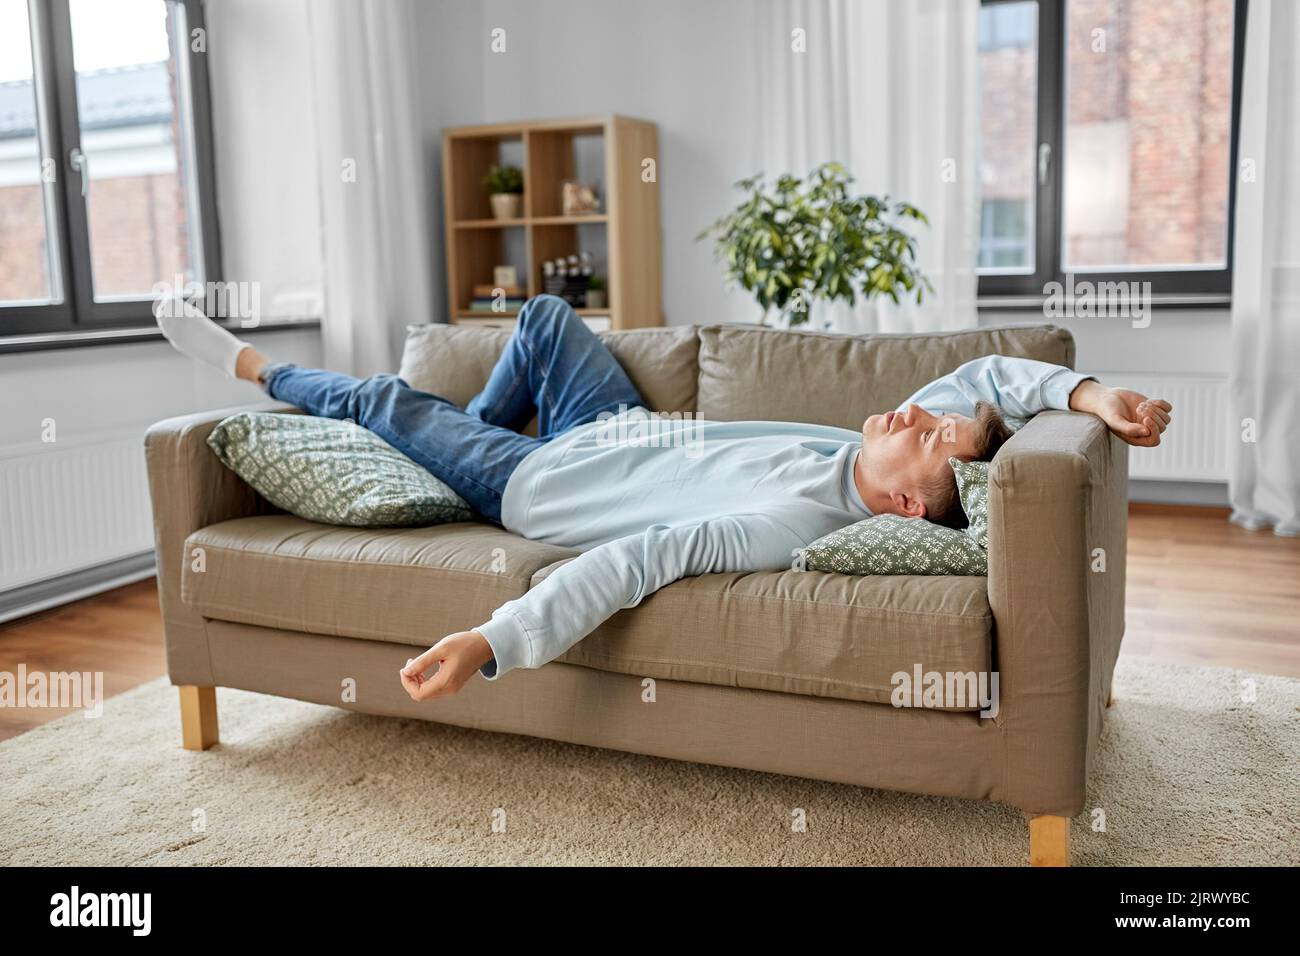 bored or lazy young man lying on sofa at home Stock Photo